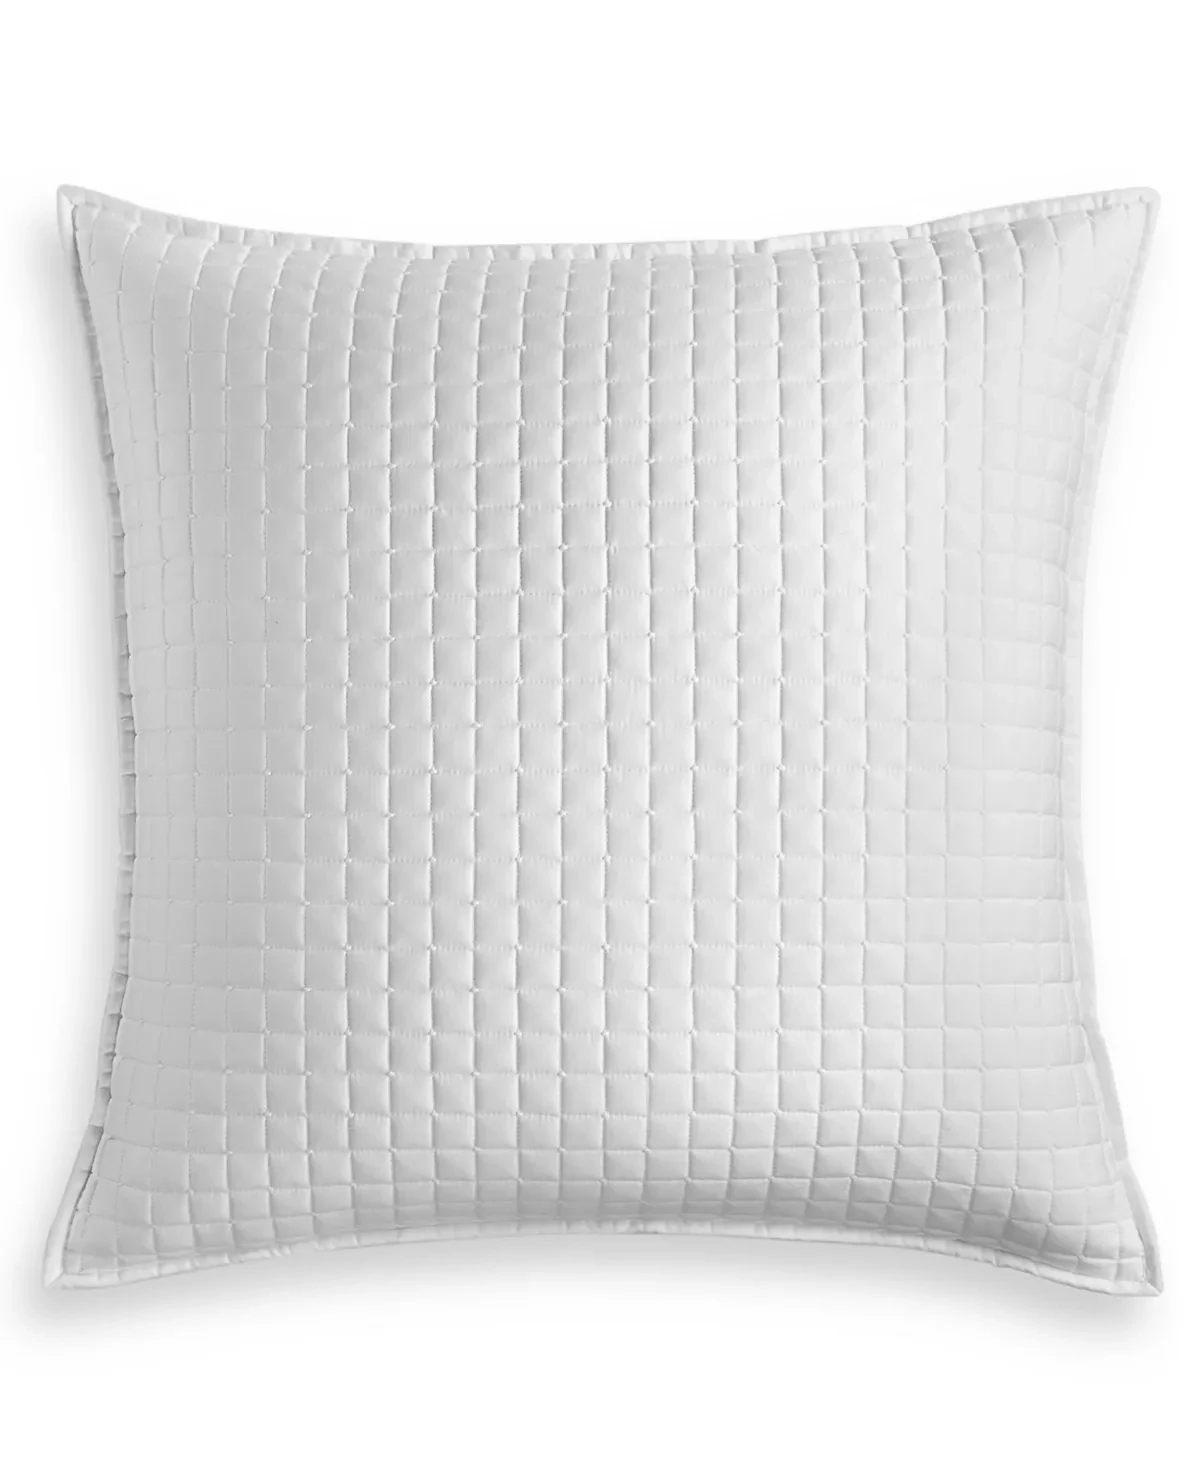 Hotel Collection Basic Grid Quilted Euro Sham, Dove